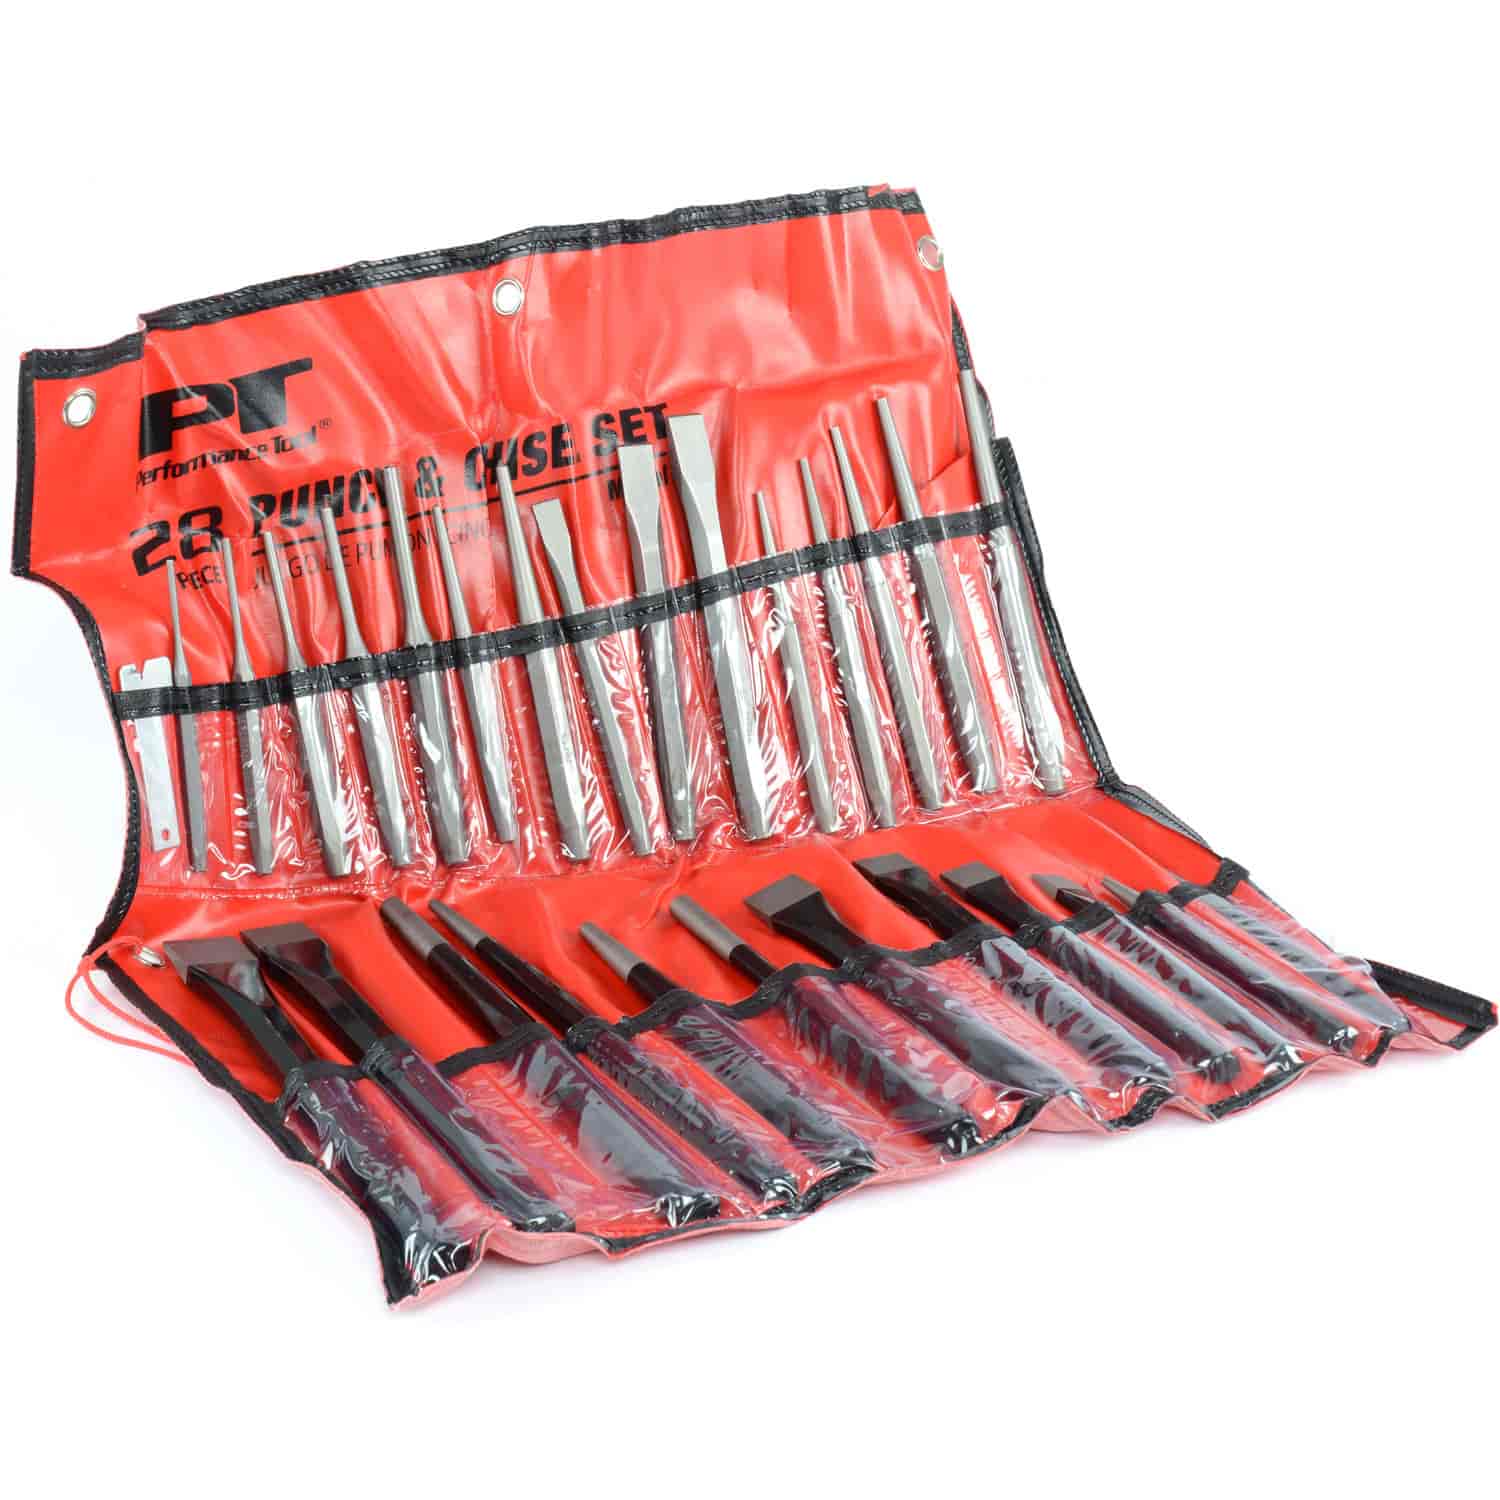 Punch and Chisel Set 28 Piece Set